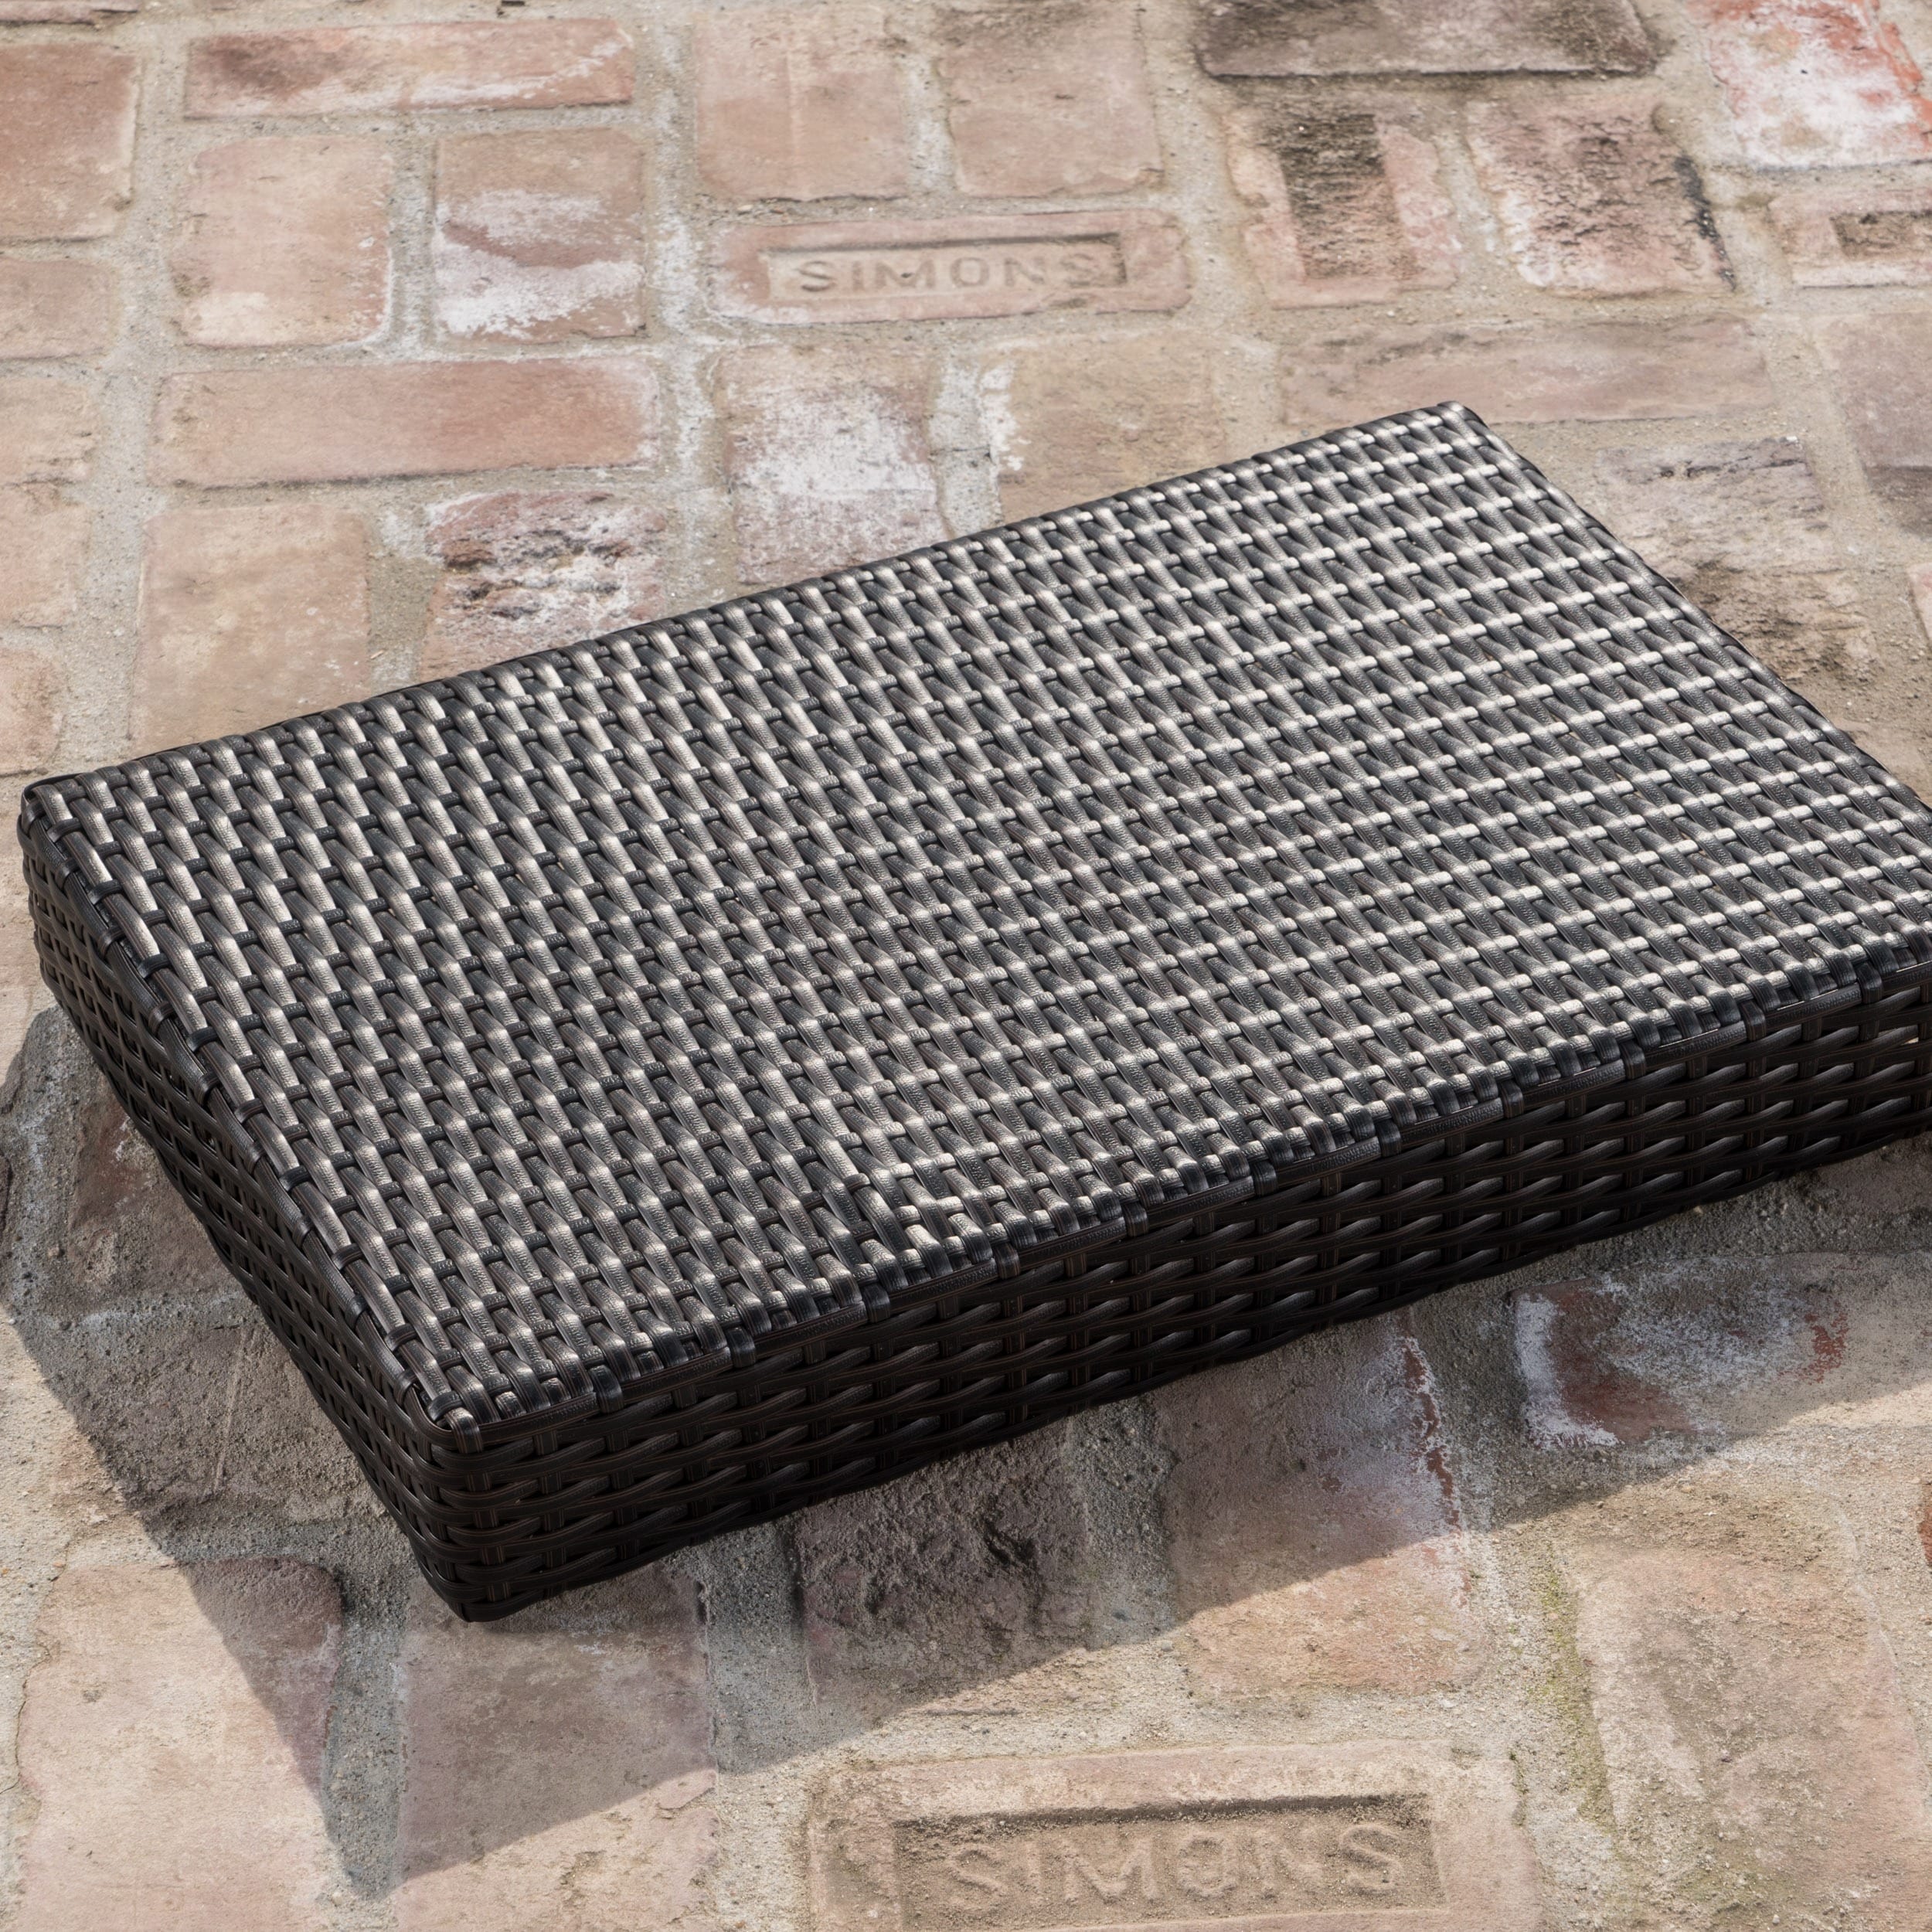 Thira Outdoor Wicker End Table - image 4 of 5